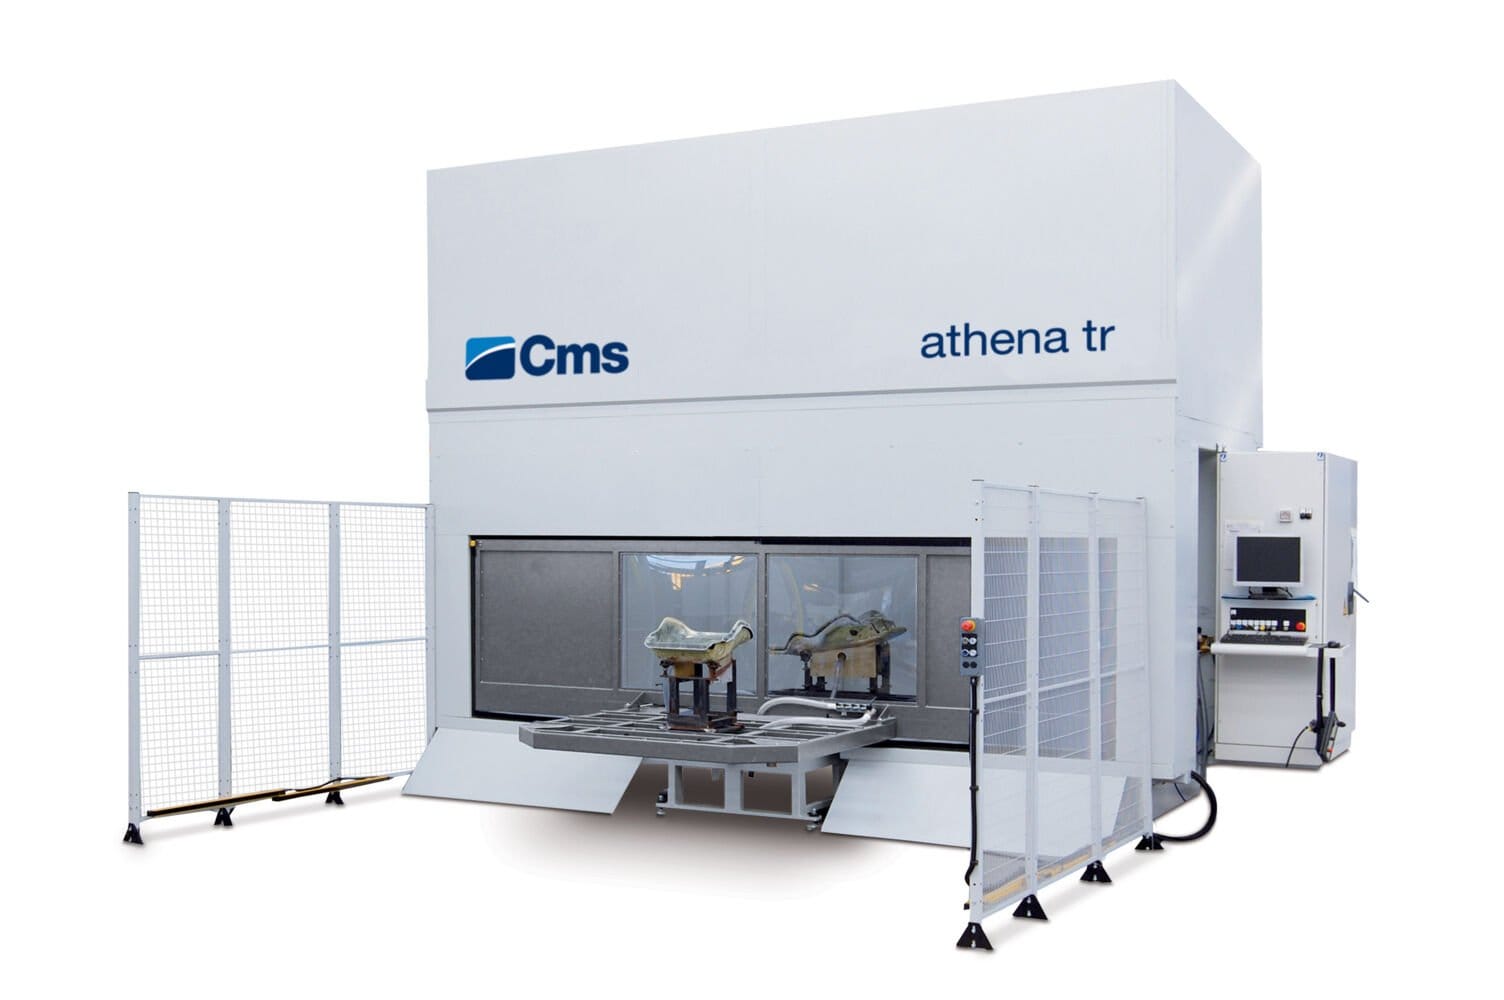 CMS athena tr: the compact solution for traveling at high speed!